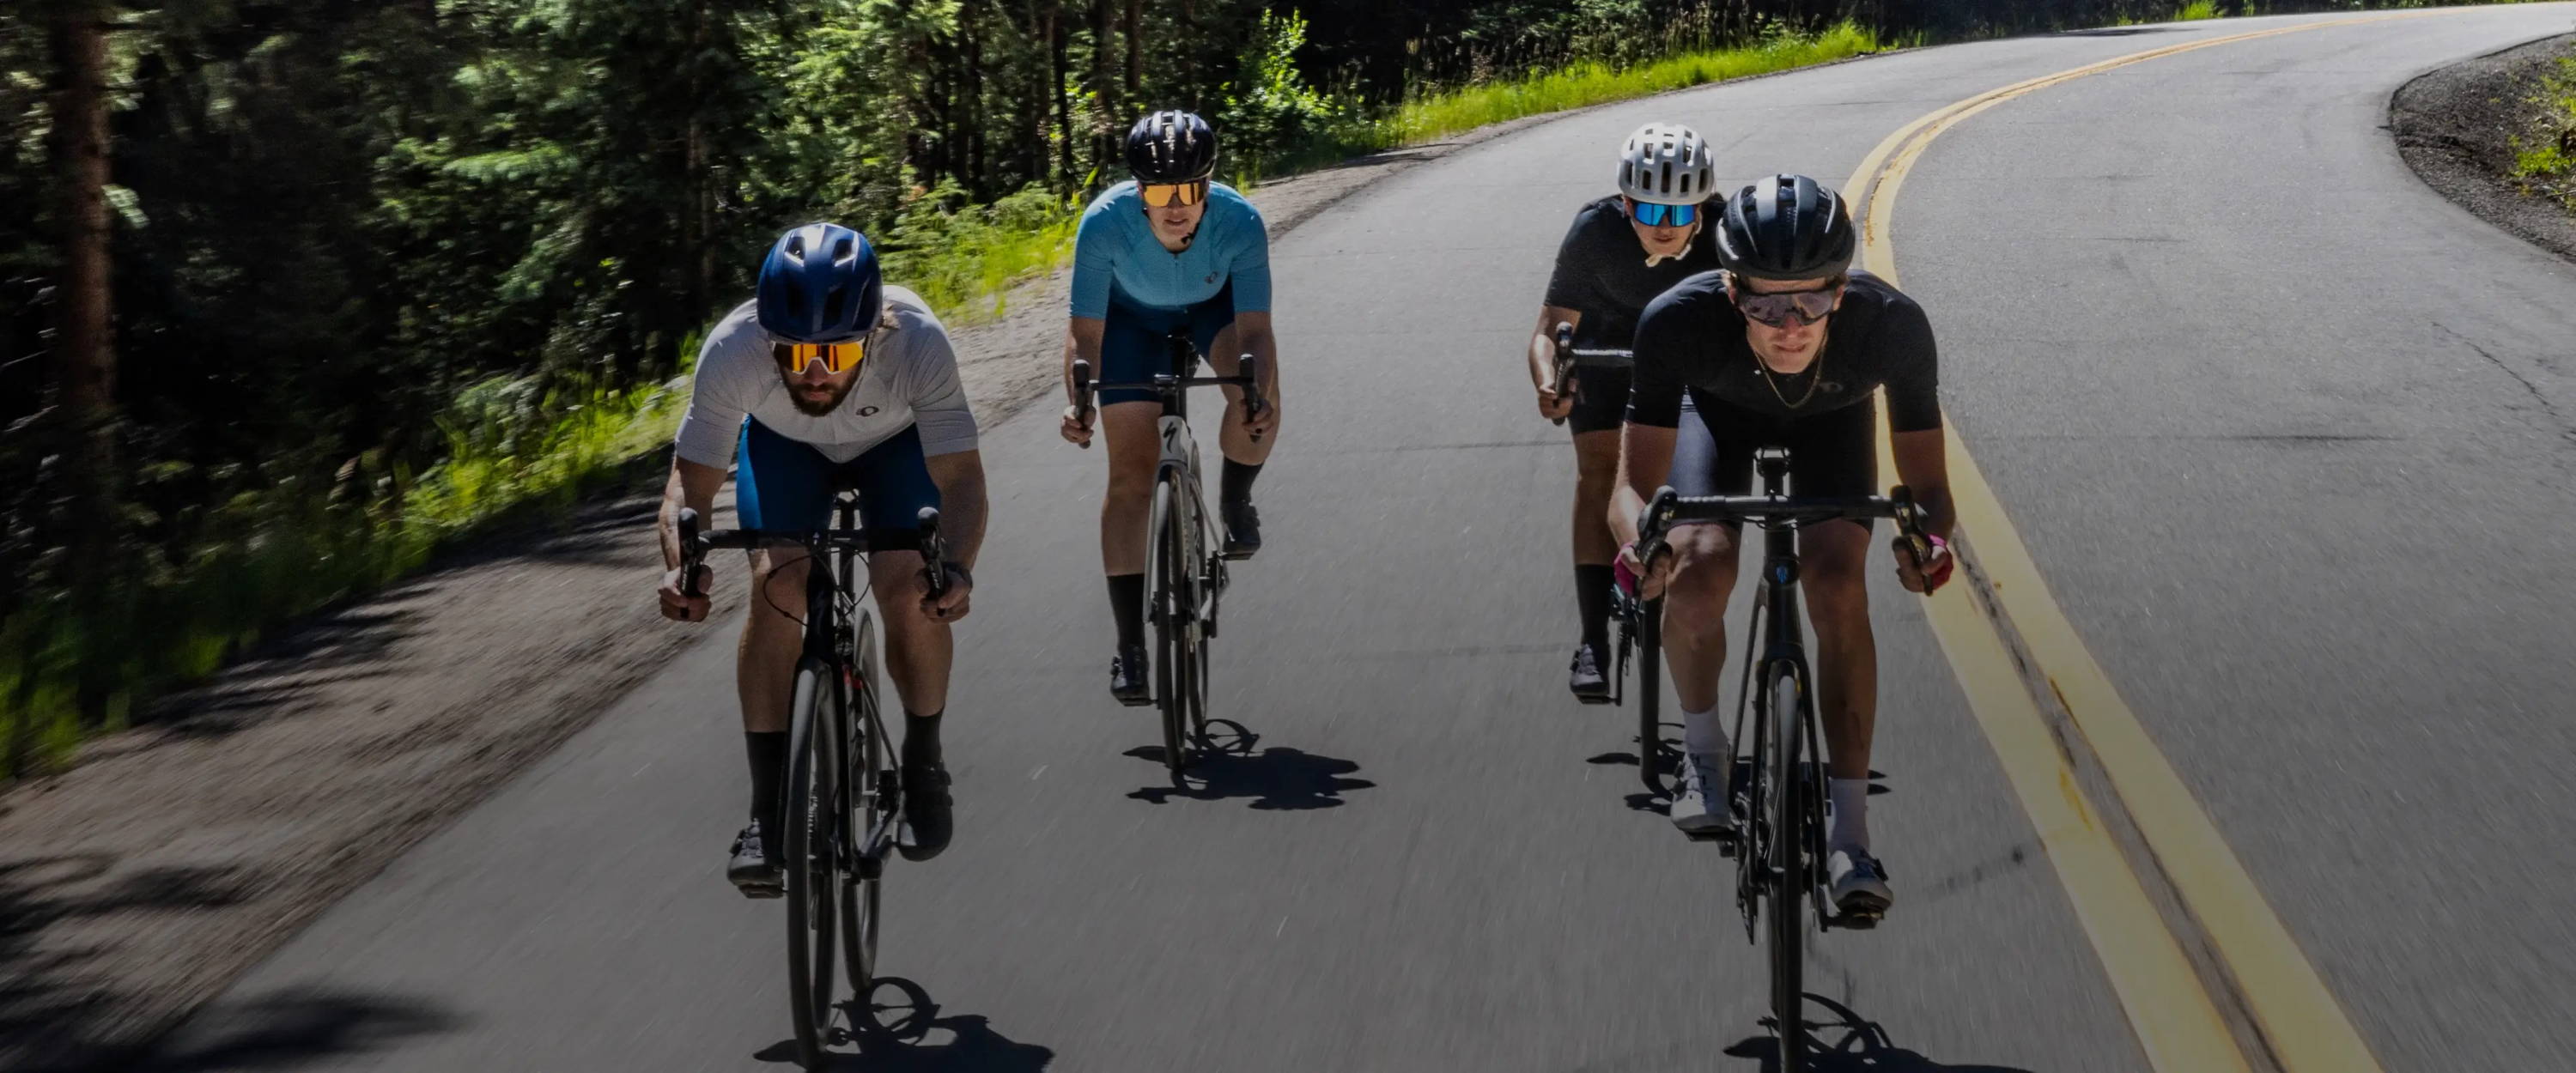 Group of road cyclists on a ride together rocking out in their PEARL iZUMi Attack kits